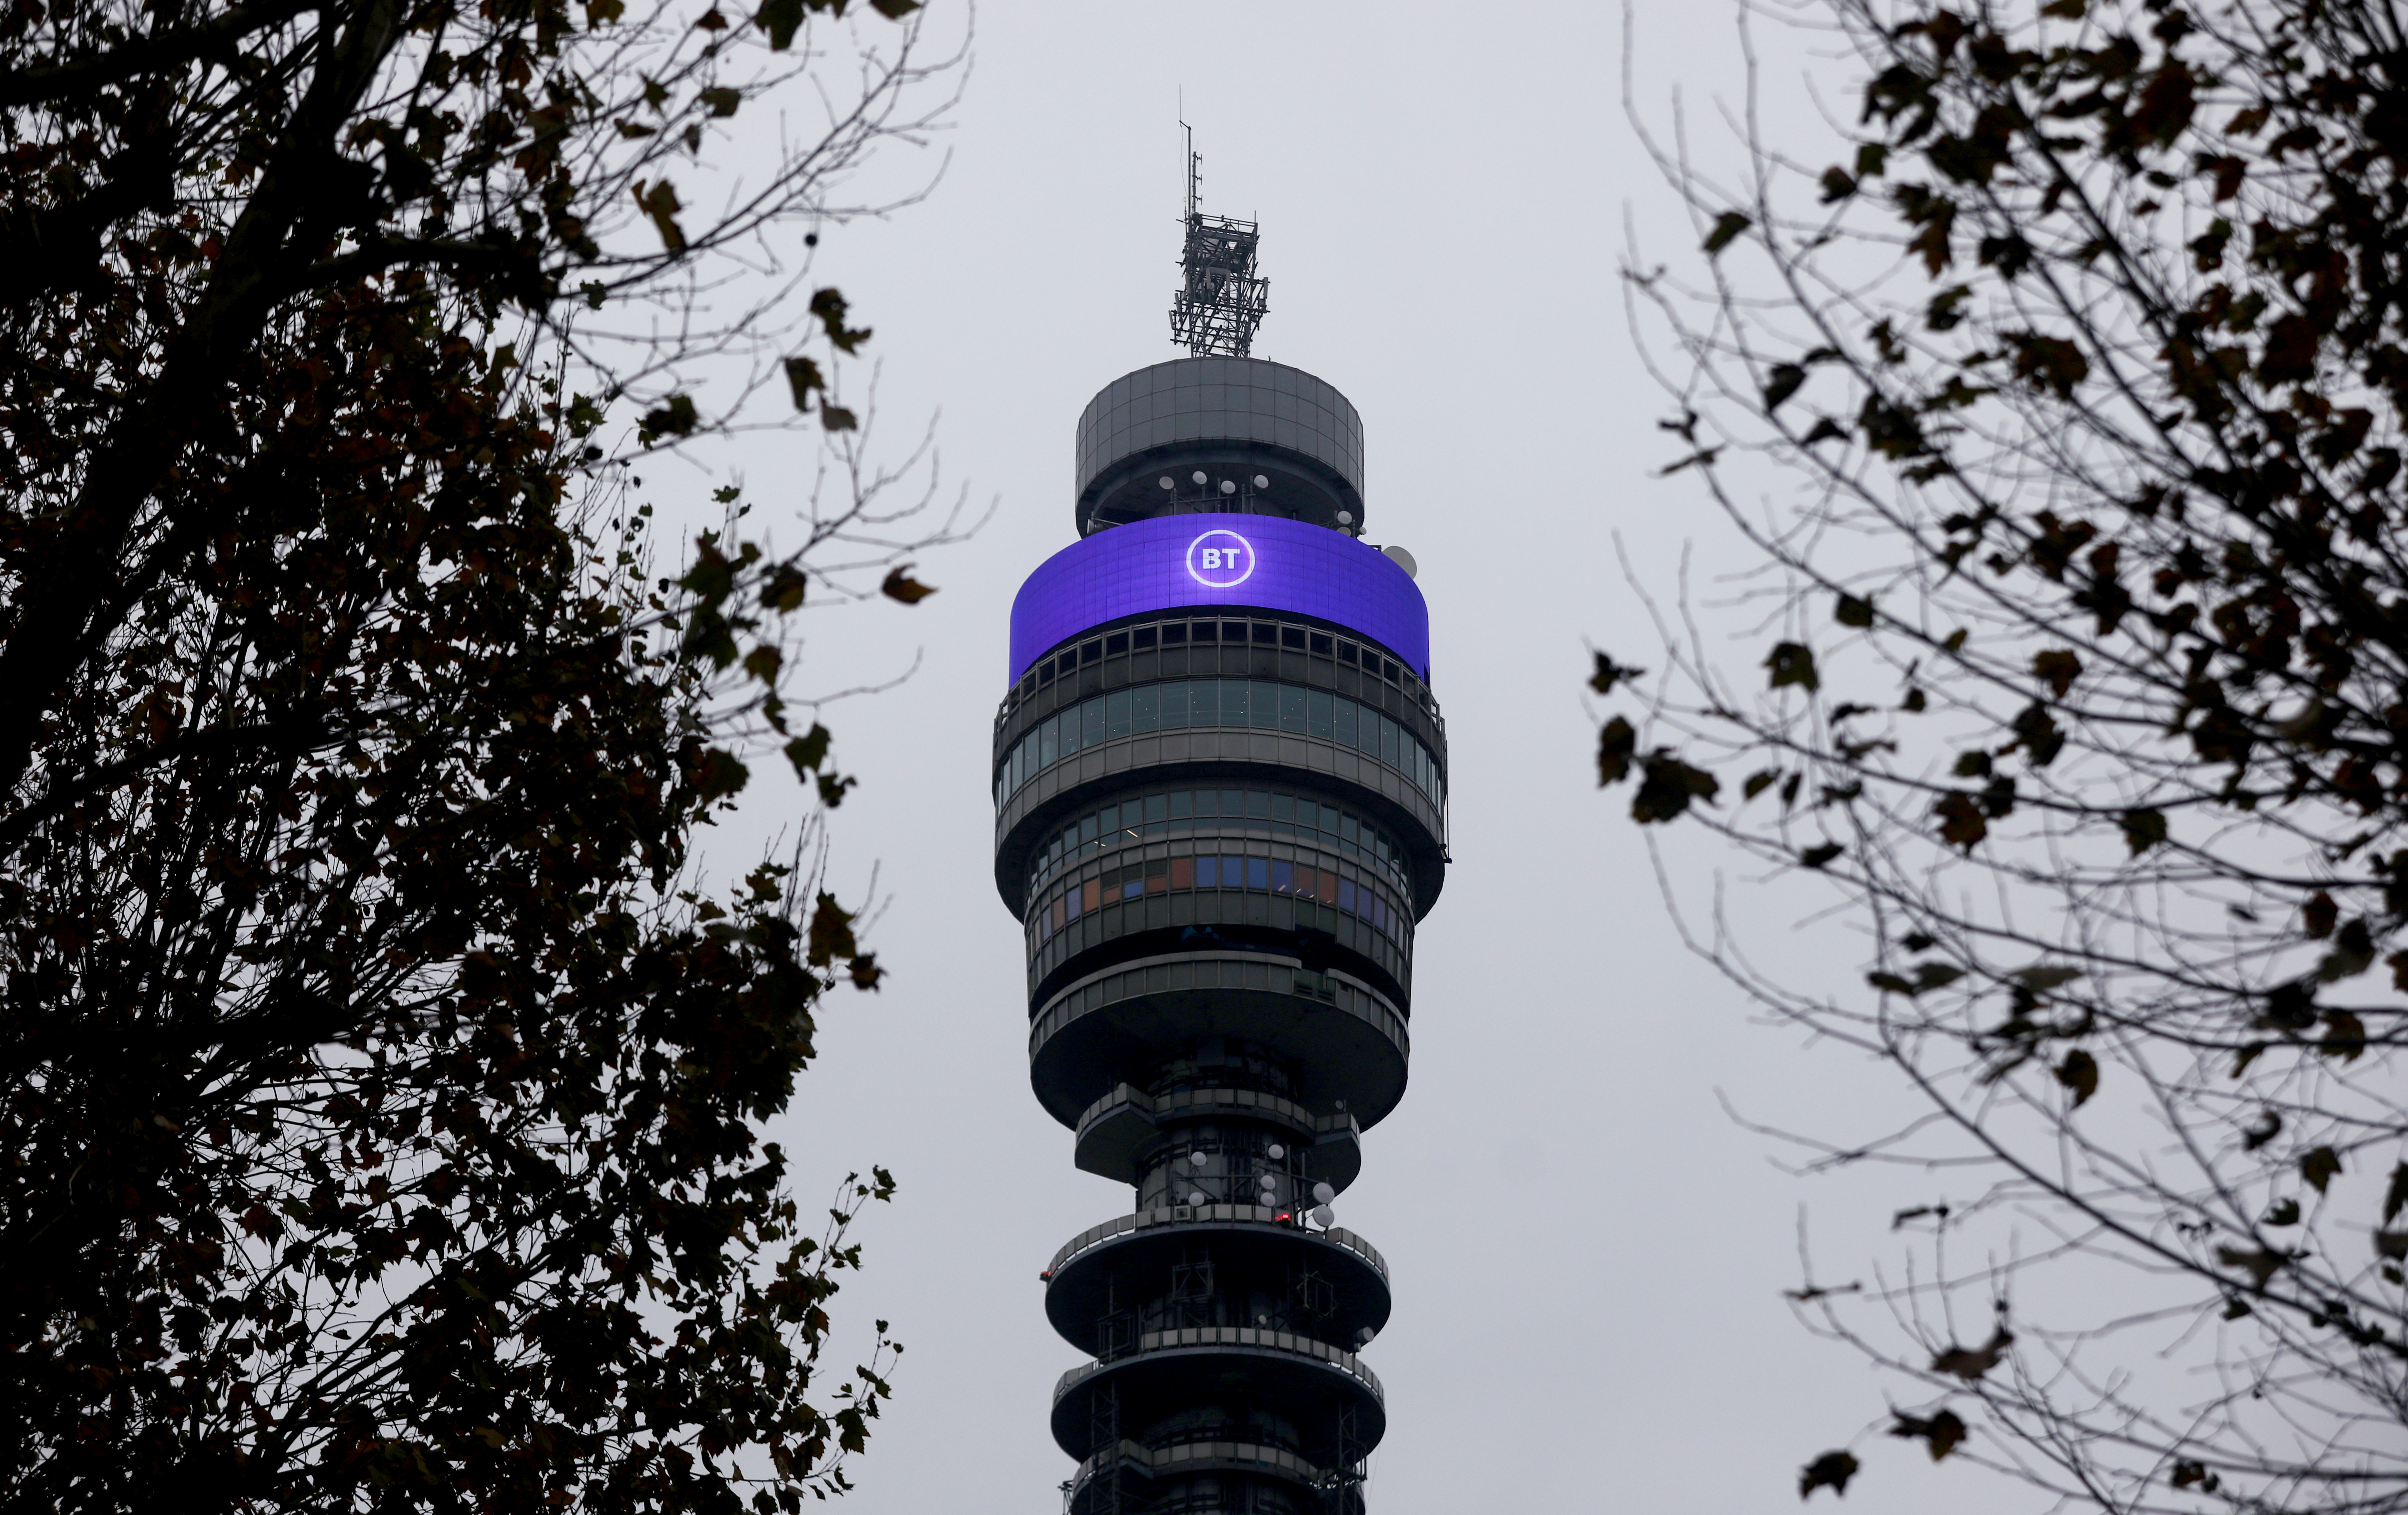 BT Tower owned by British Telecom is pictured in London